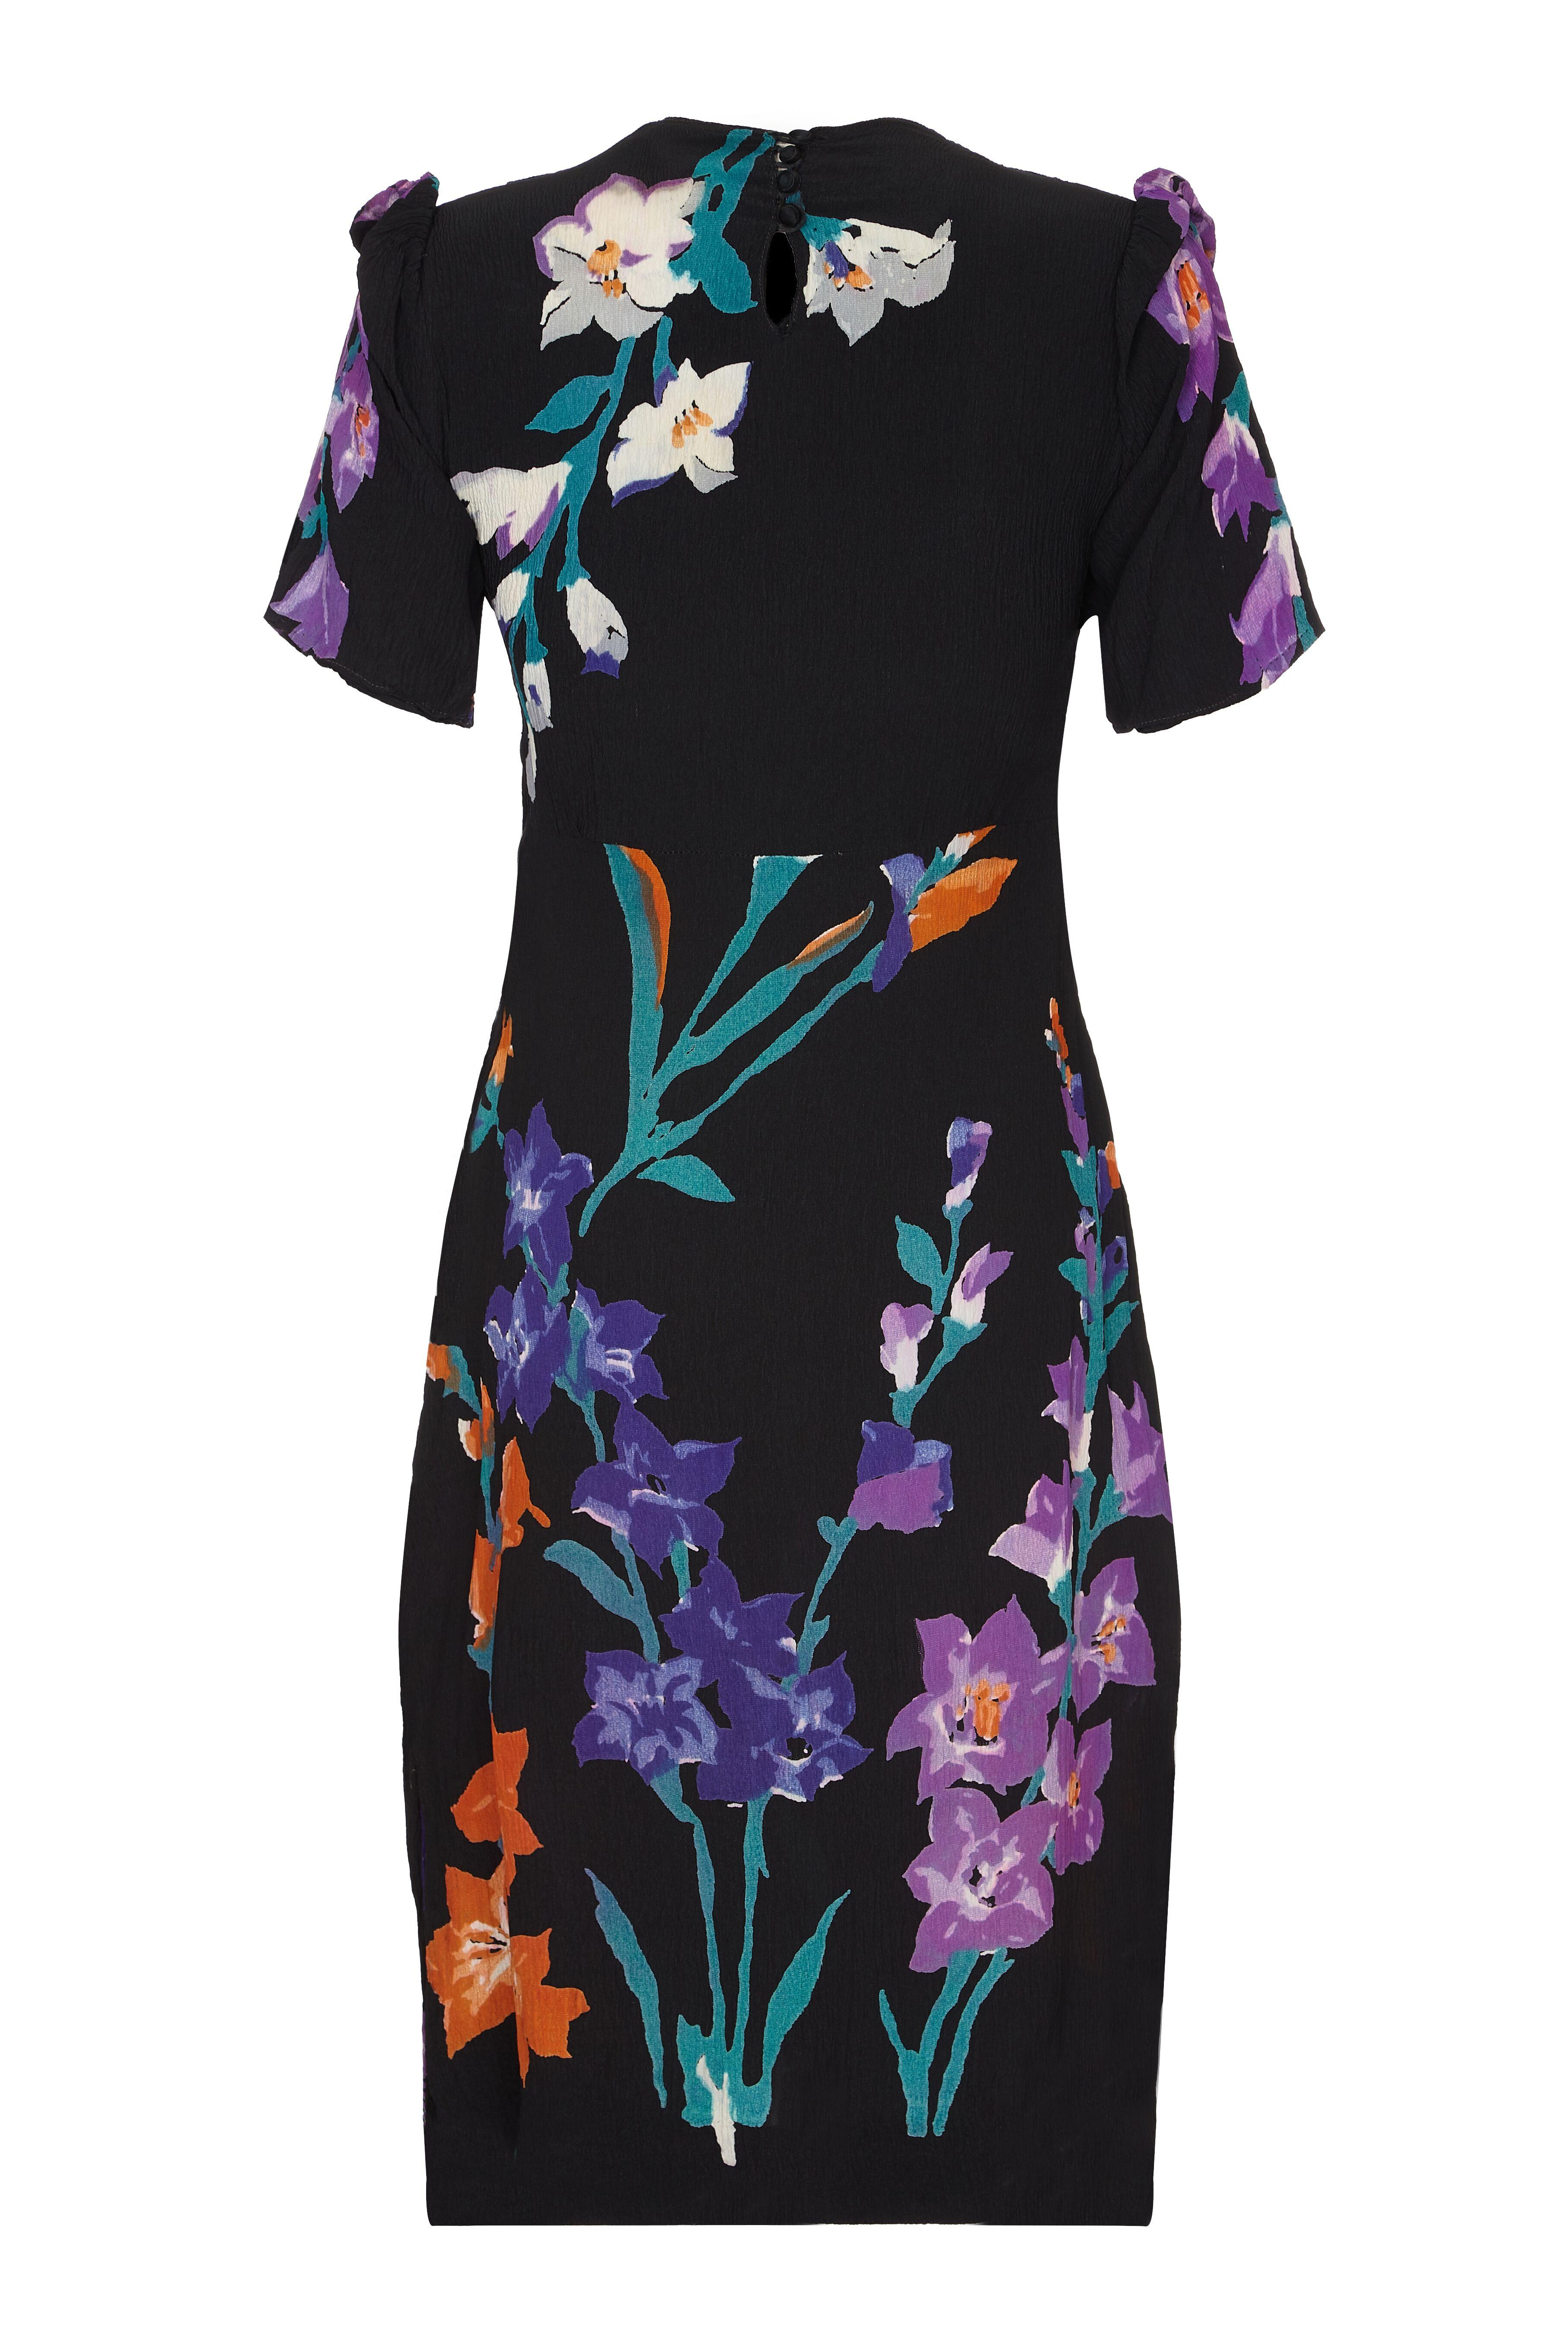 This captivating 1940s silk crepe floral print dress is simple, elegant and in impeccable vintage condition. A large abstract floral design adorns the lightweight crepe in deep orange, lilac, violet and jade green contrasting beautifully with the